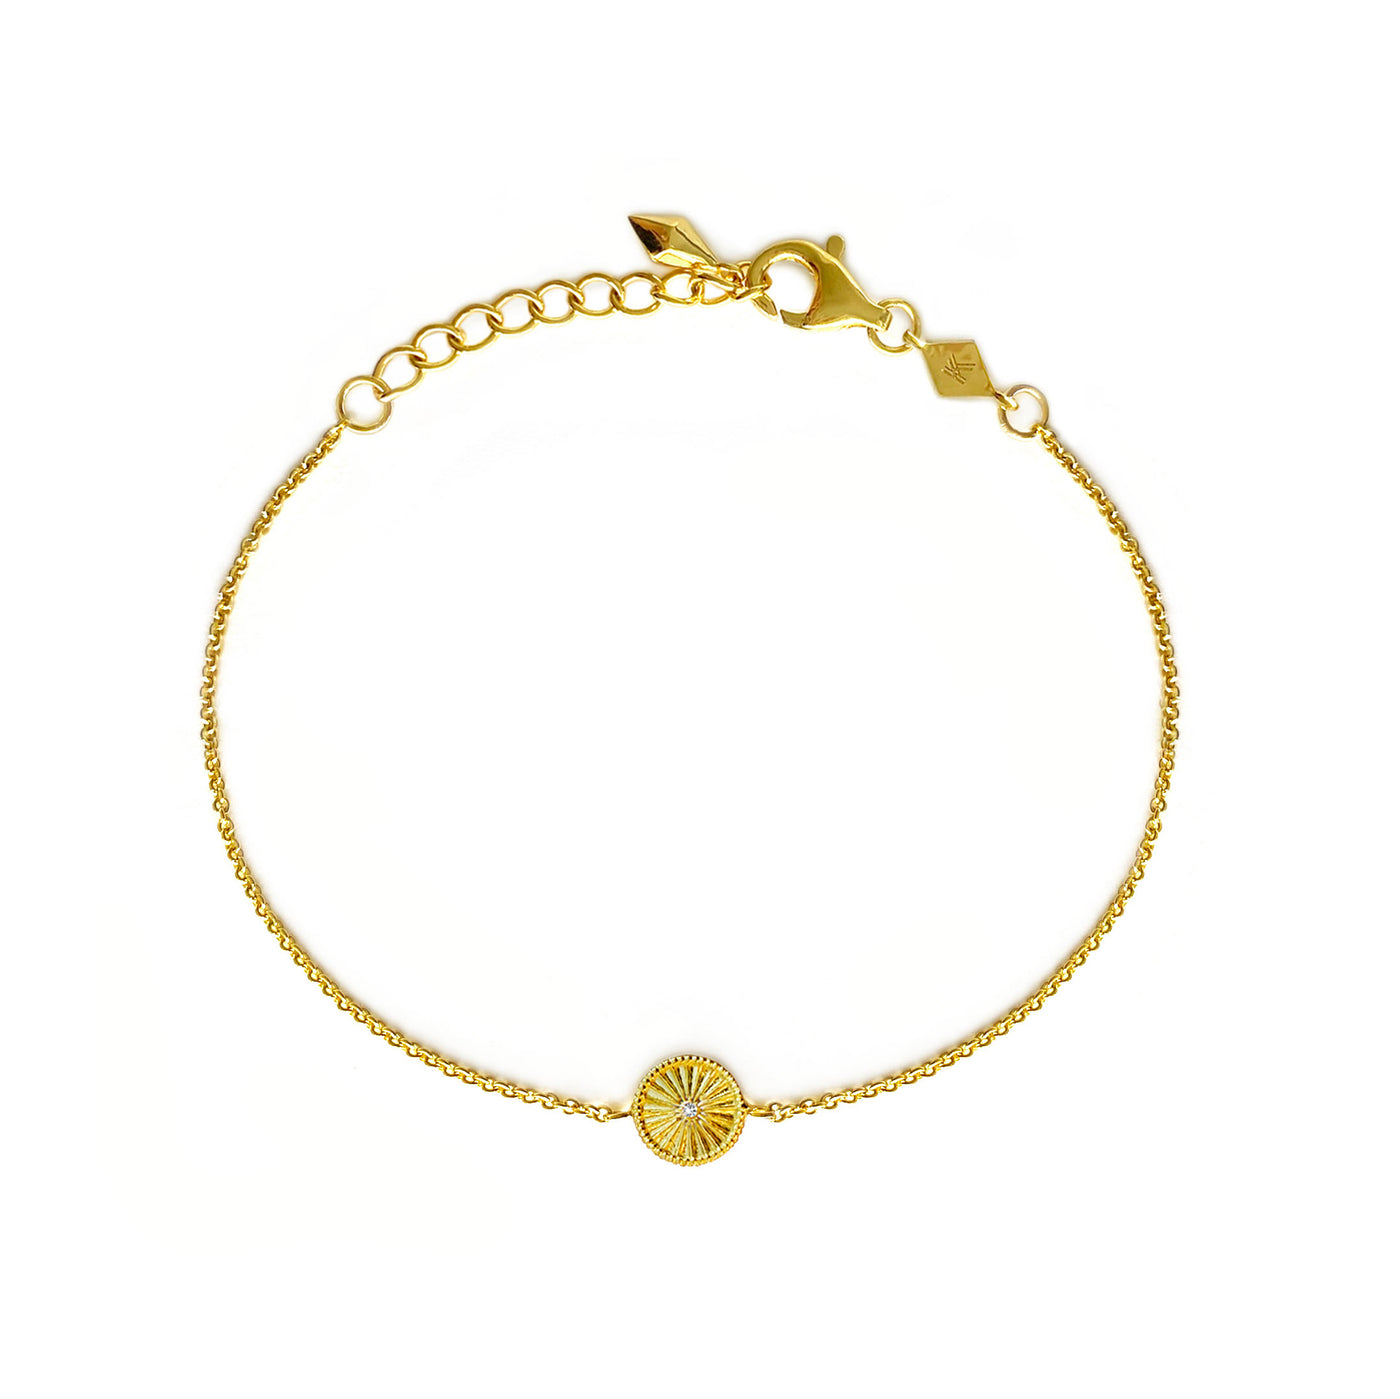 Gold plated sterling silver engraved delicate sun bracelet with CZ crystal